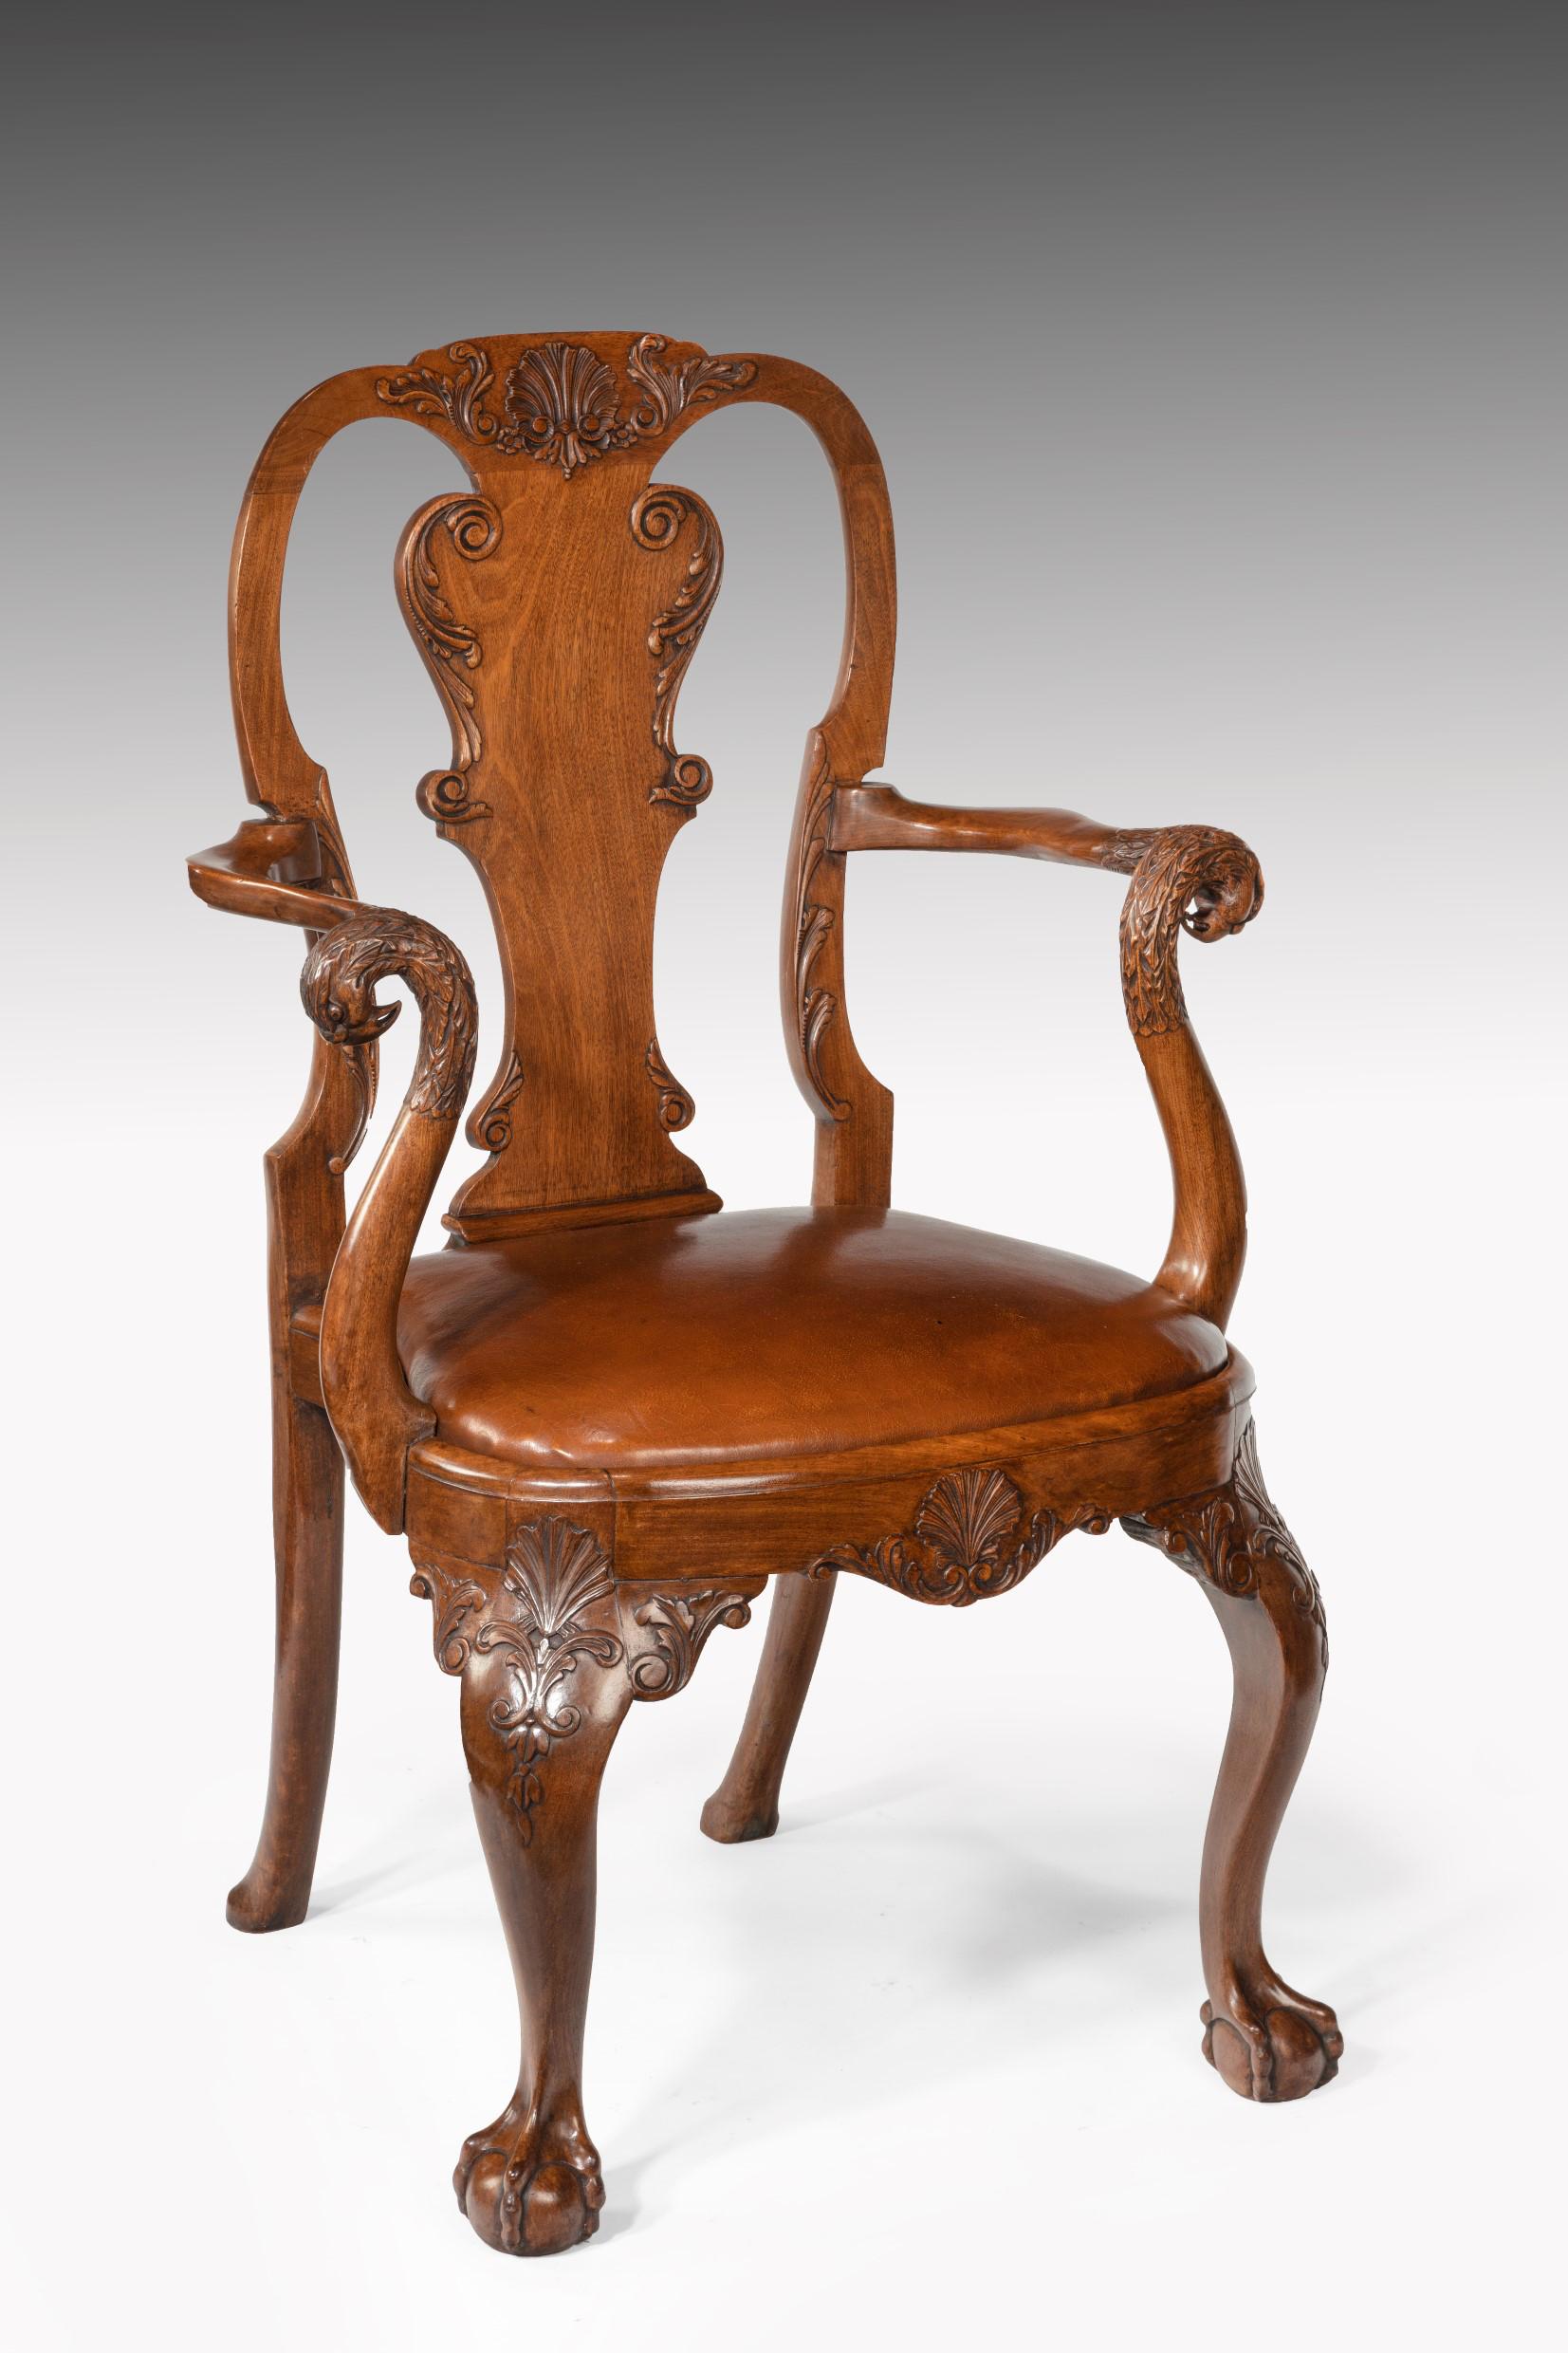 A finely carved and extremely good quality walnut vase back armchair / desk chair with leather drop in squab and eagle head terminals.

English, circa 1890-1900.

A fine example of excellent craftsmanship from the 1900s, this chair has been